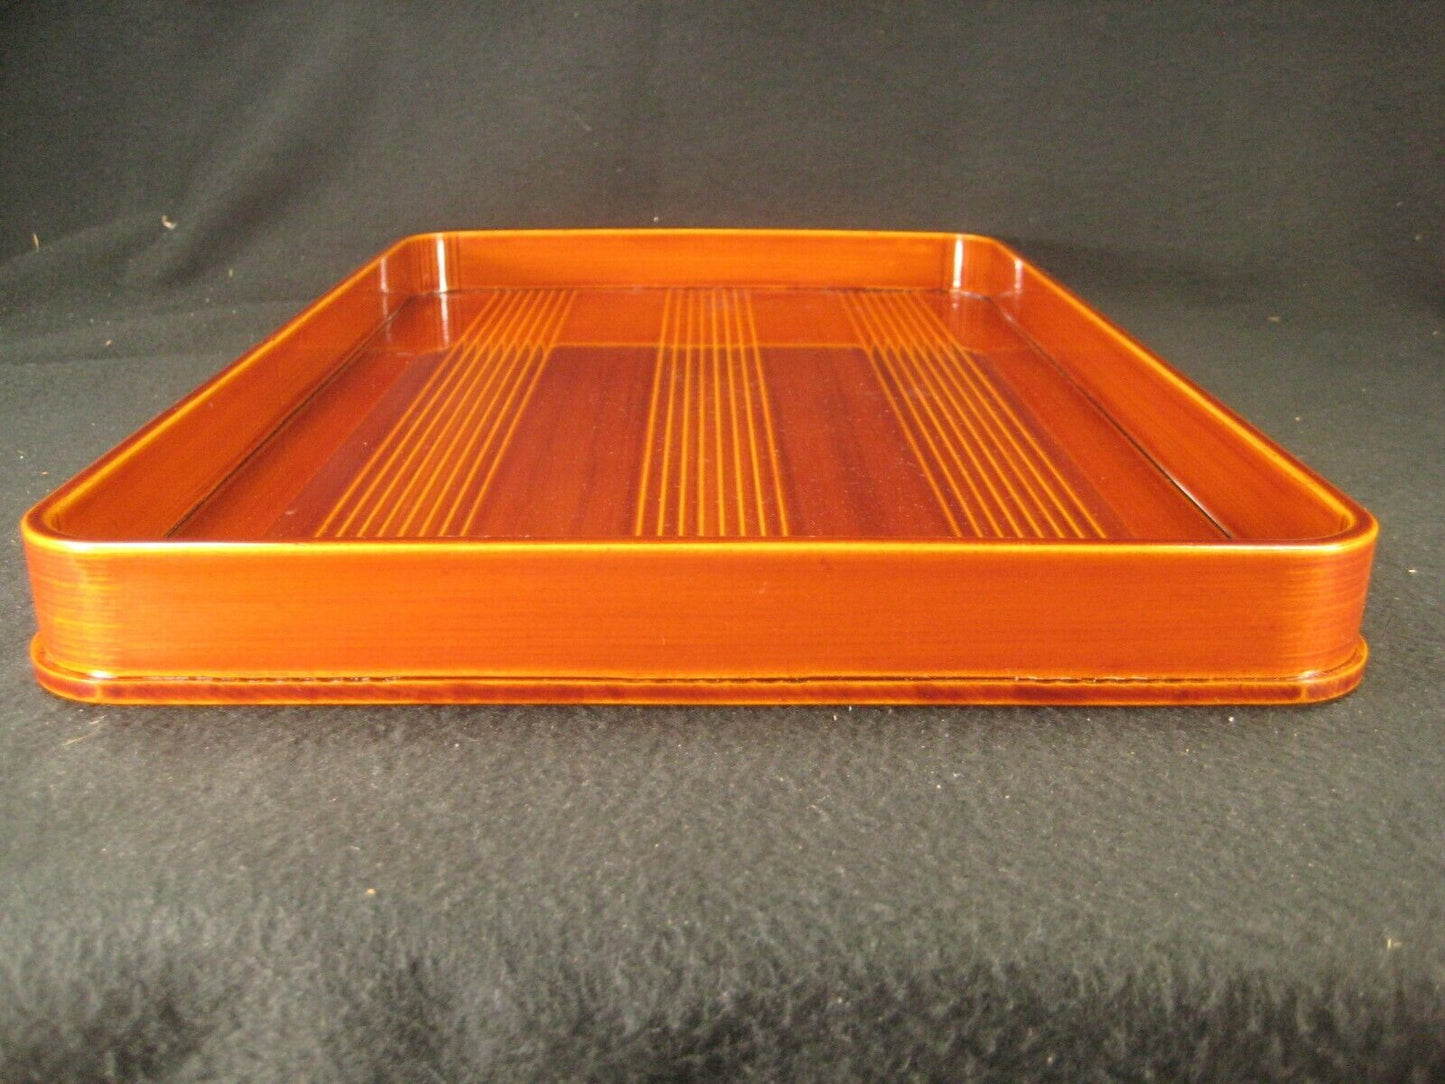 Vintage Japanese Hand Crafted Wood Hida Shunkei Lacquer Tray 18 X 11 1/4"